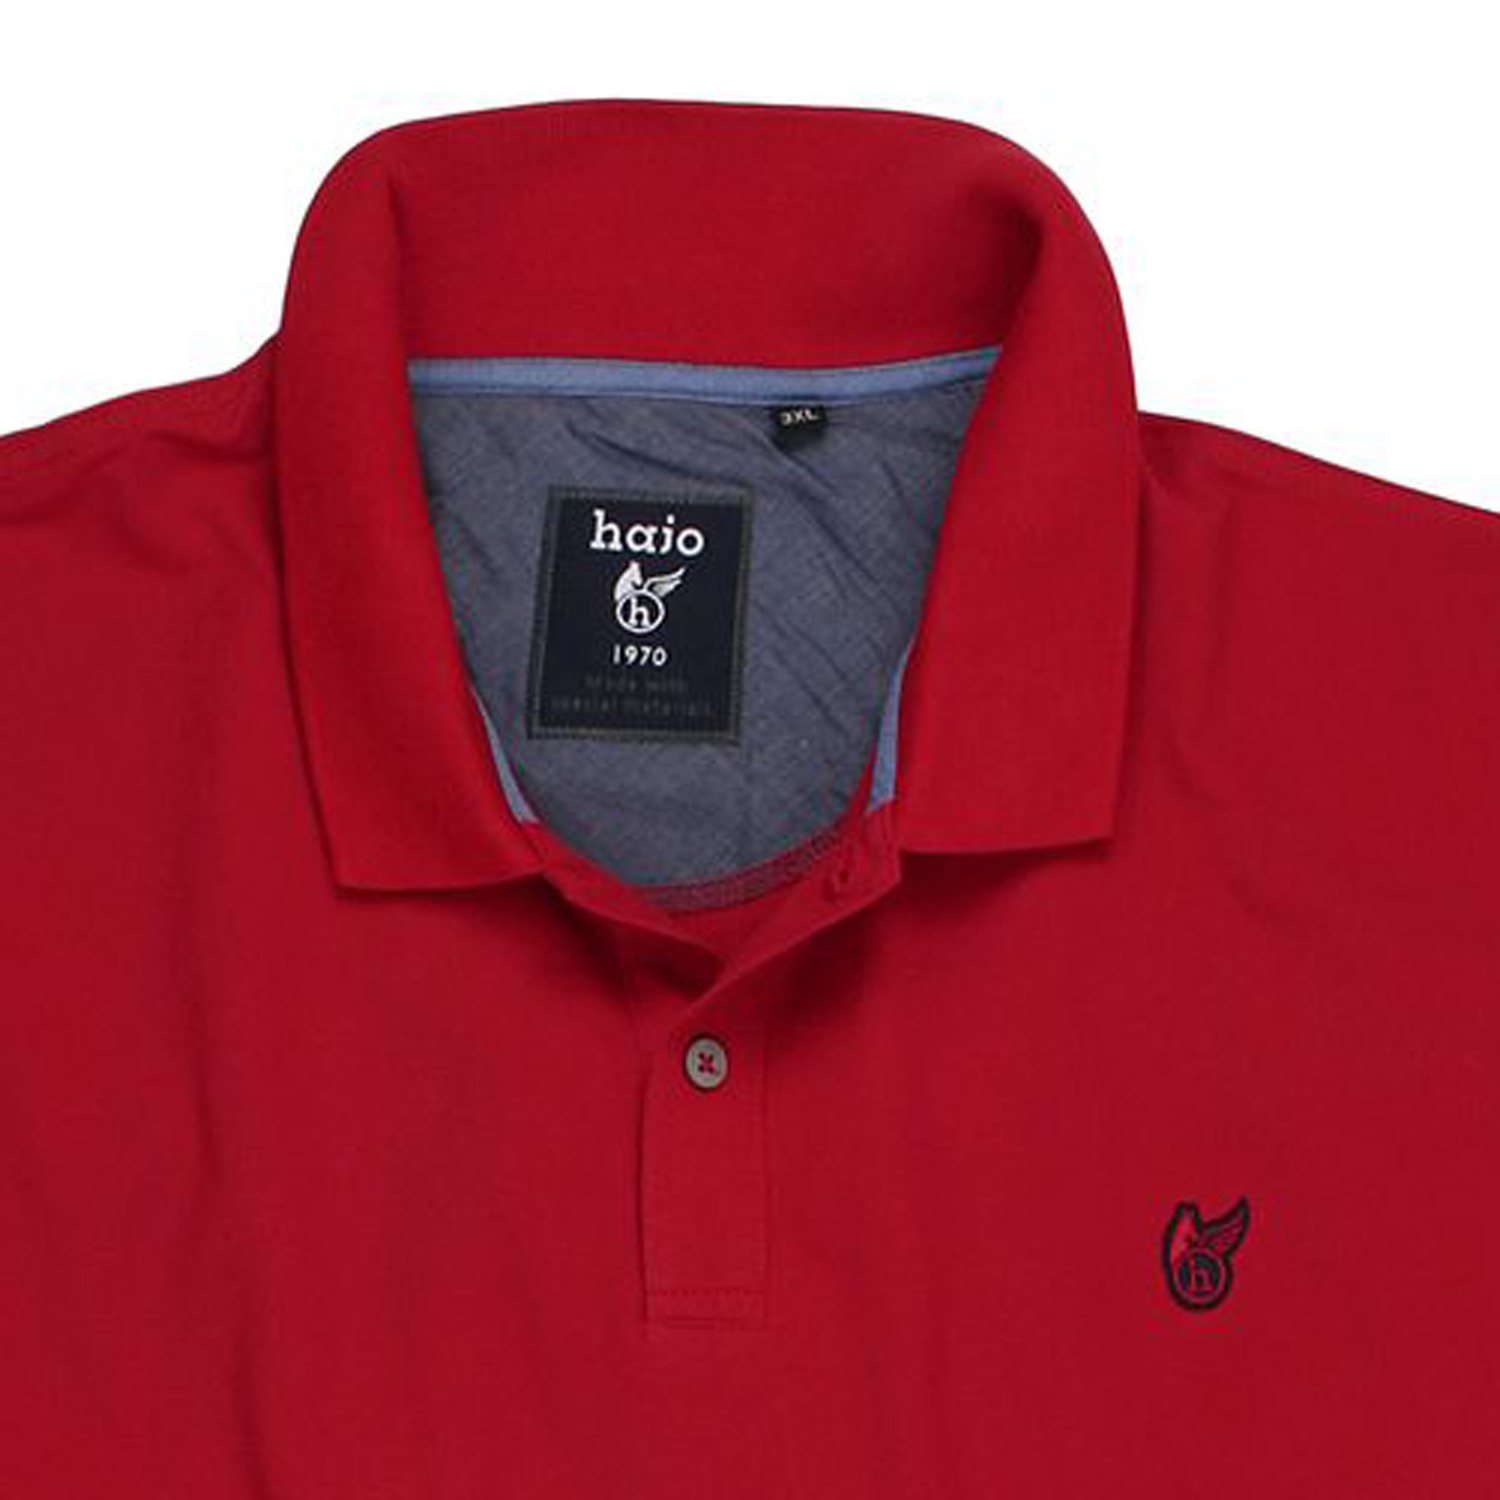 Polo shirt "stay fresh" by hajo in red up to oversize 6XL